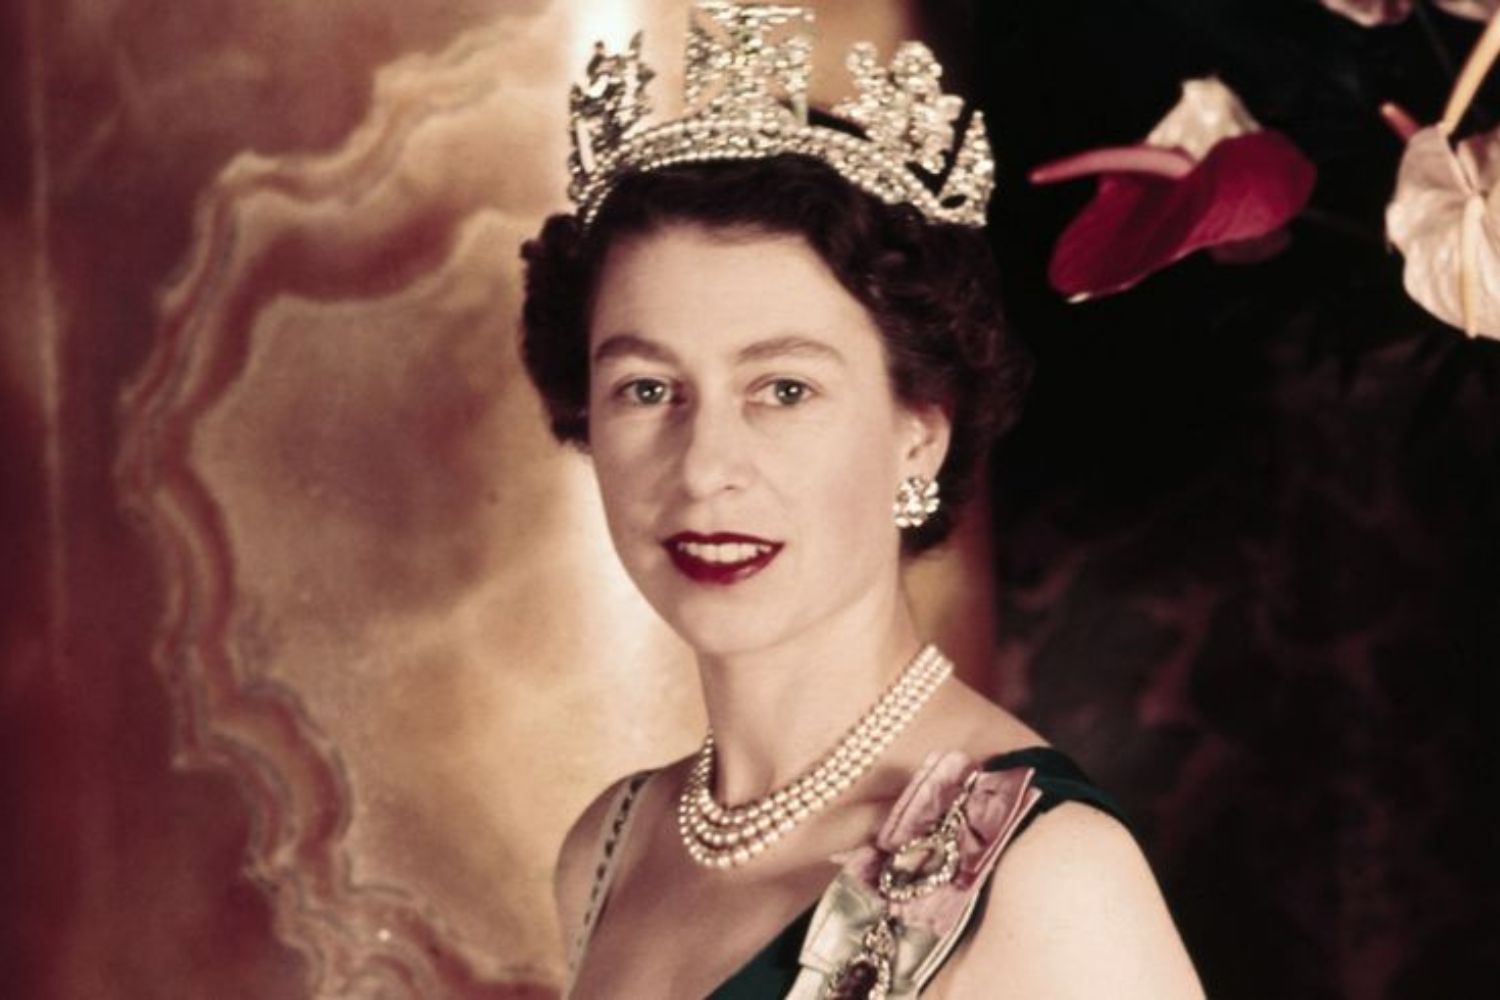 The Queen was beloved by Aussies